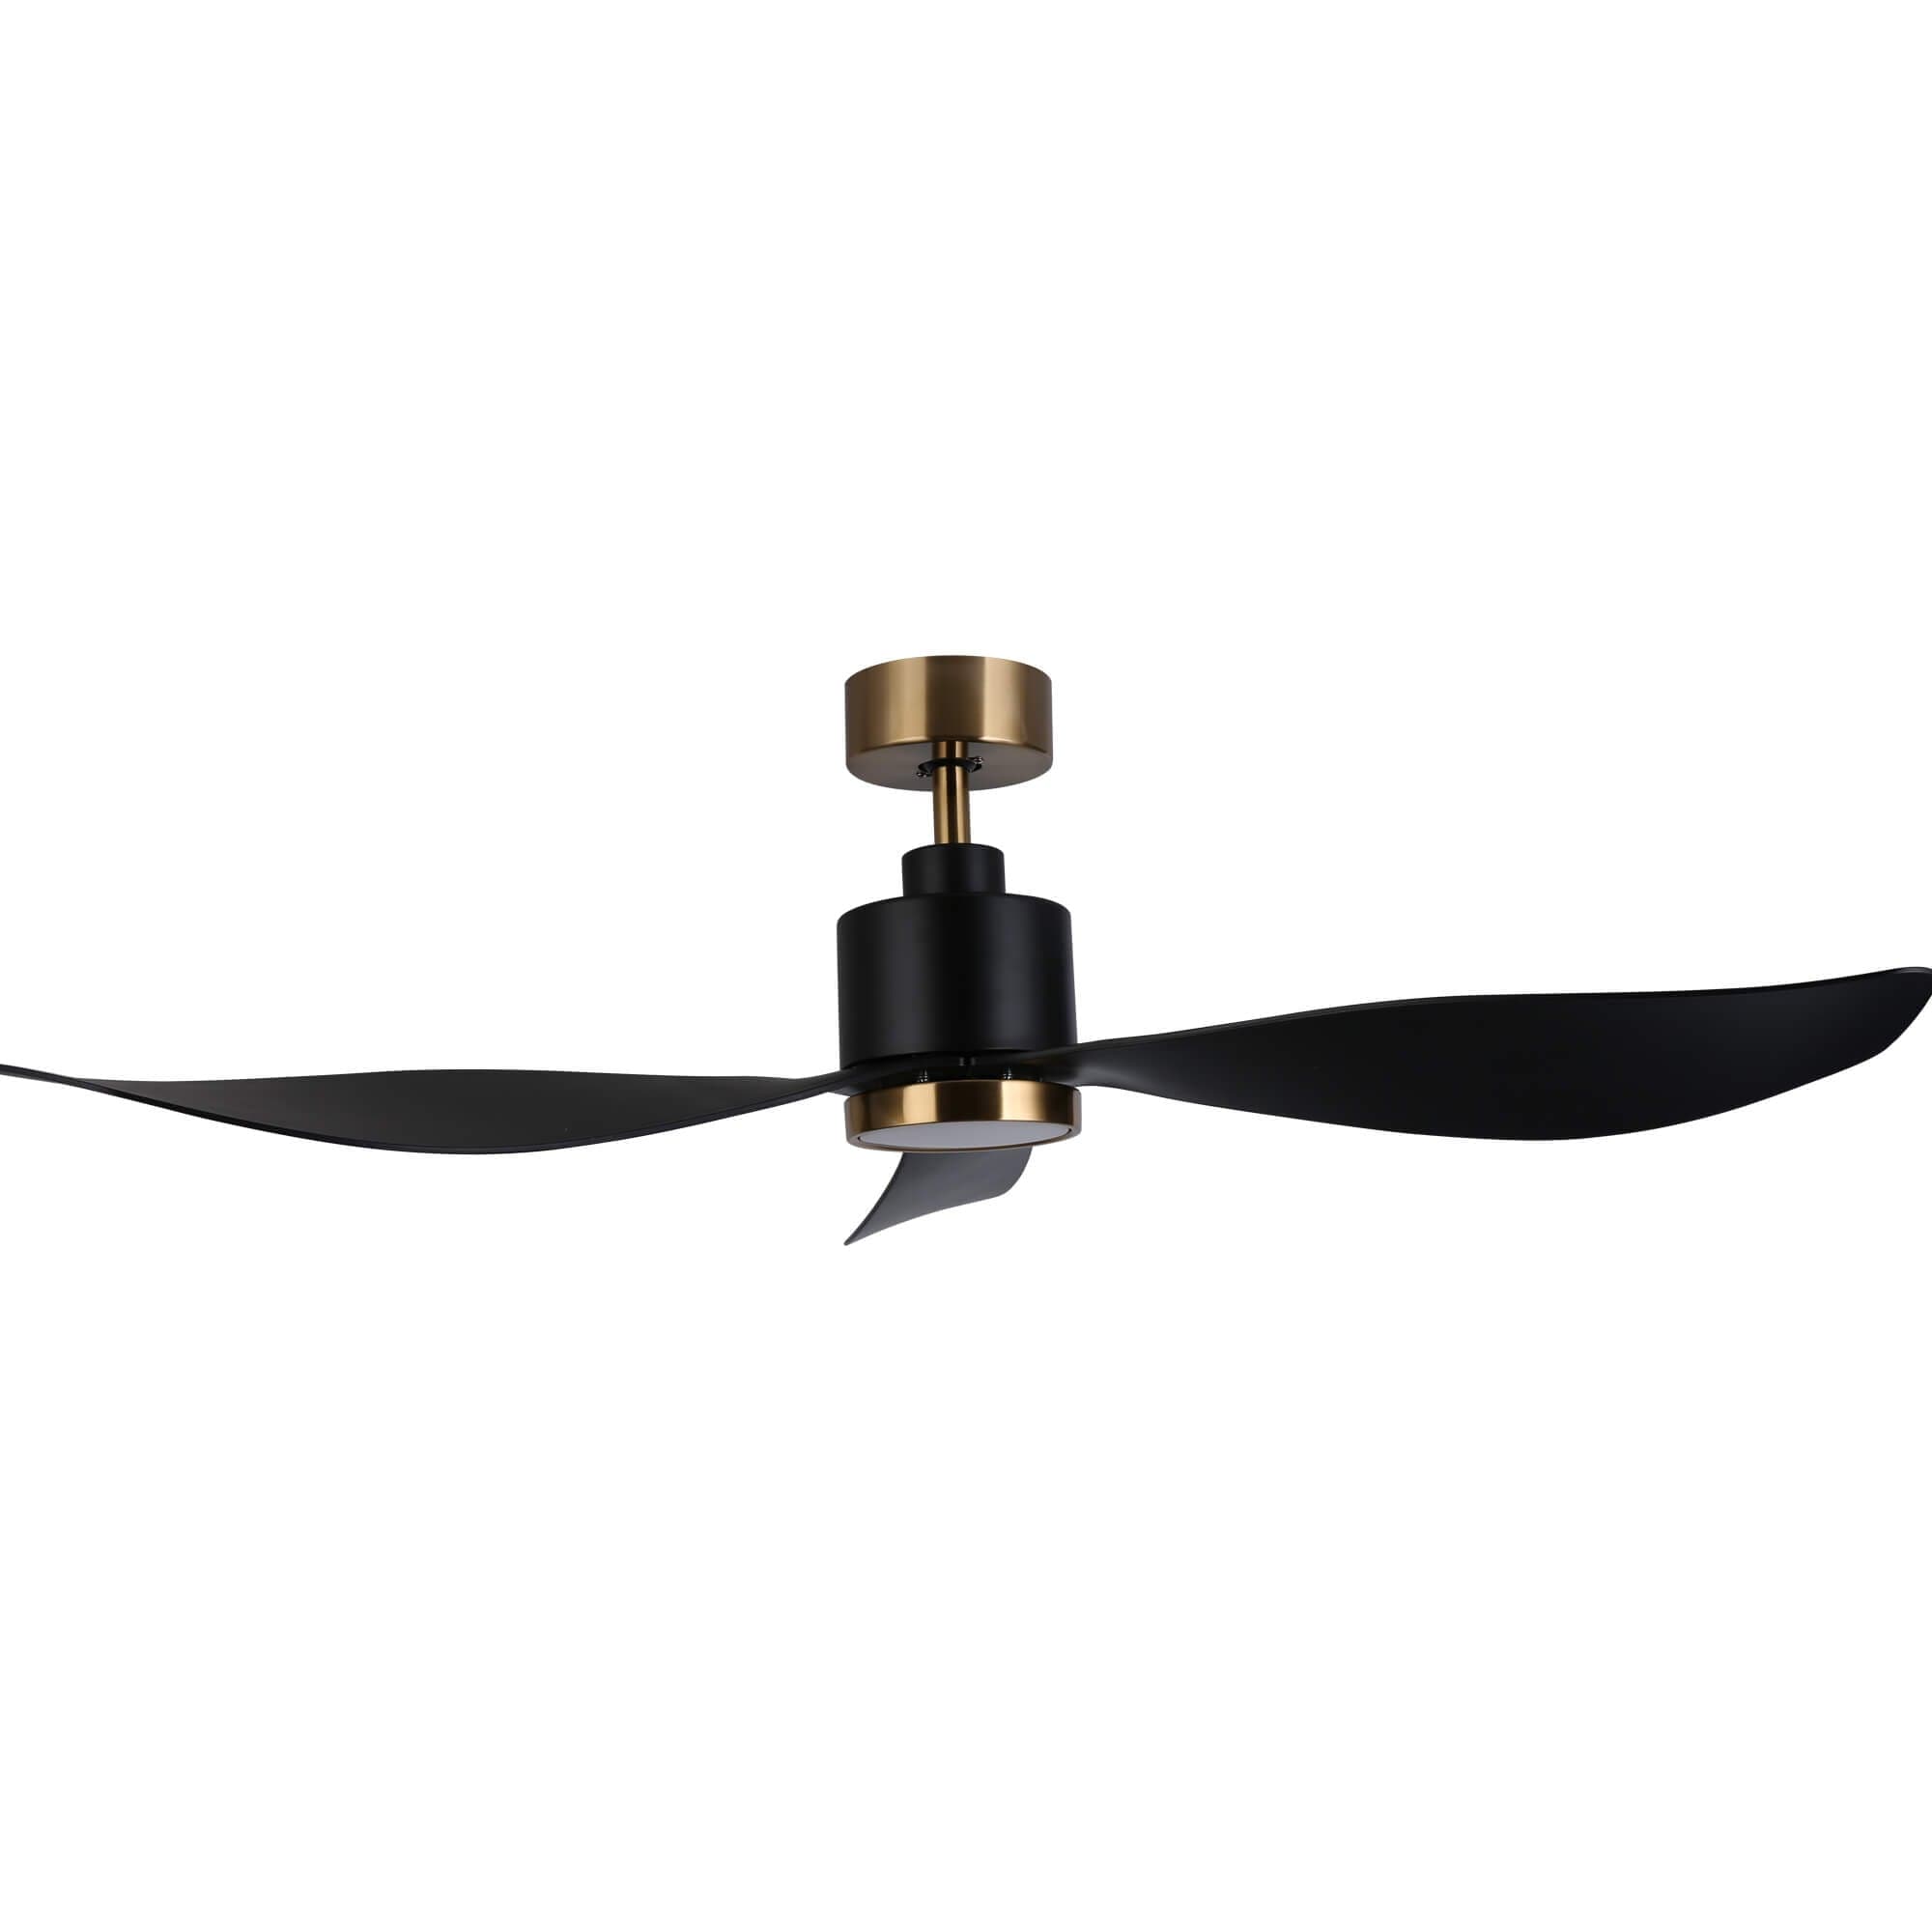 Ovios 52‘’ Ceiling Fan Reversible 3 Blades with Remote Control Lights, DC Motor